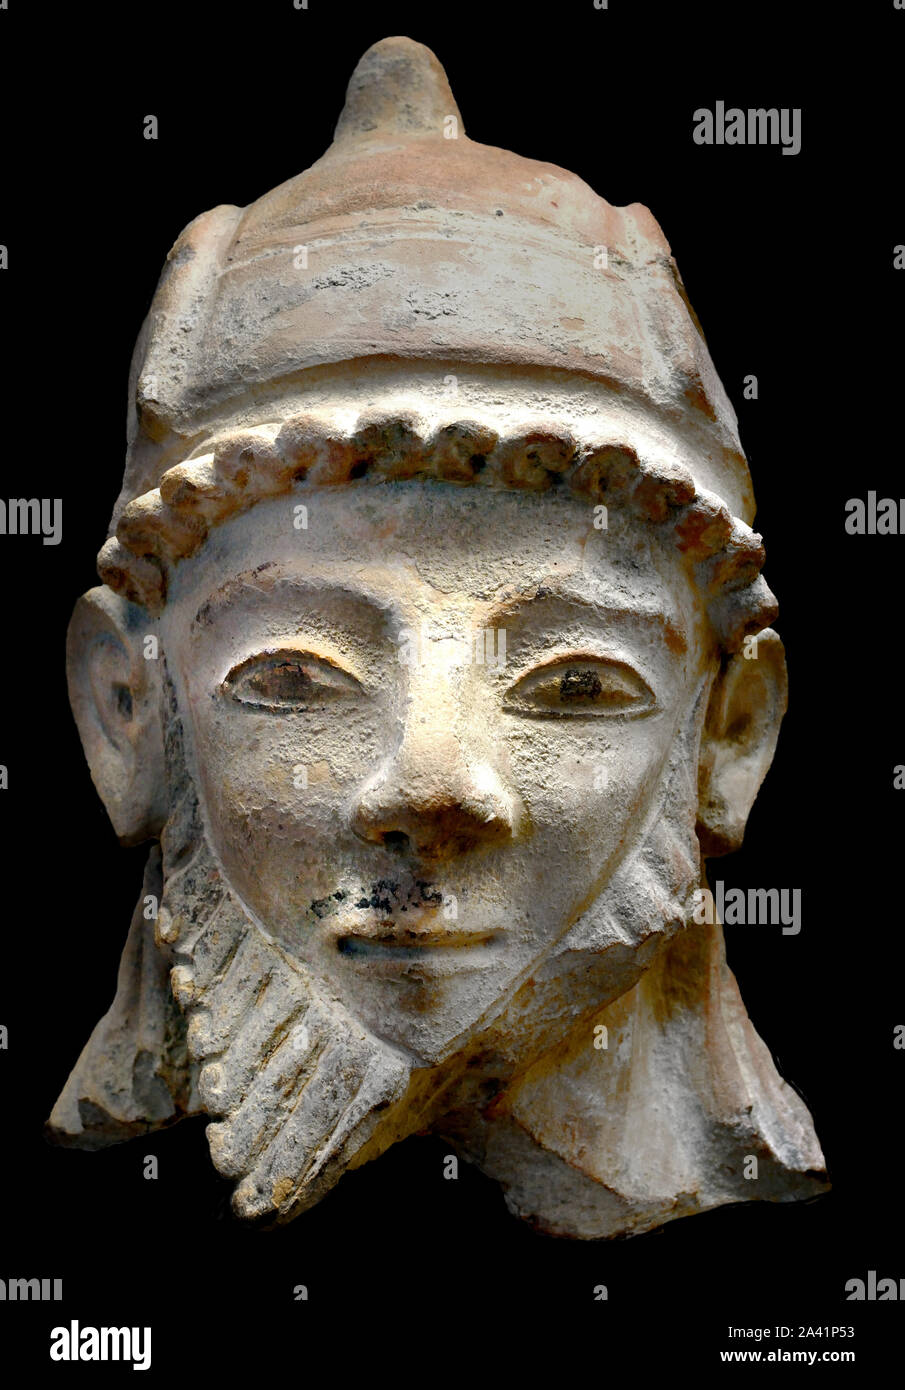 Bearded man with cap on hat 8th -5th Century BC ( Cypro-Archaic and Cypro-Classical periods (c. 750–300 BC)  8th - 5th century BC is characterized by instability due to frequent foreign intervention and domination of Cyprus.) Stock Photo